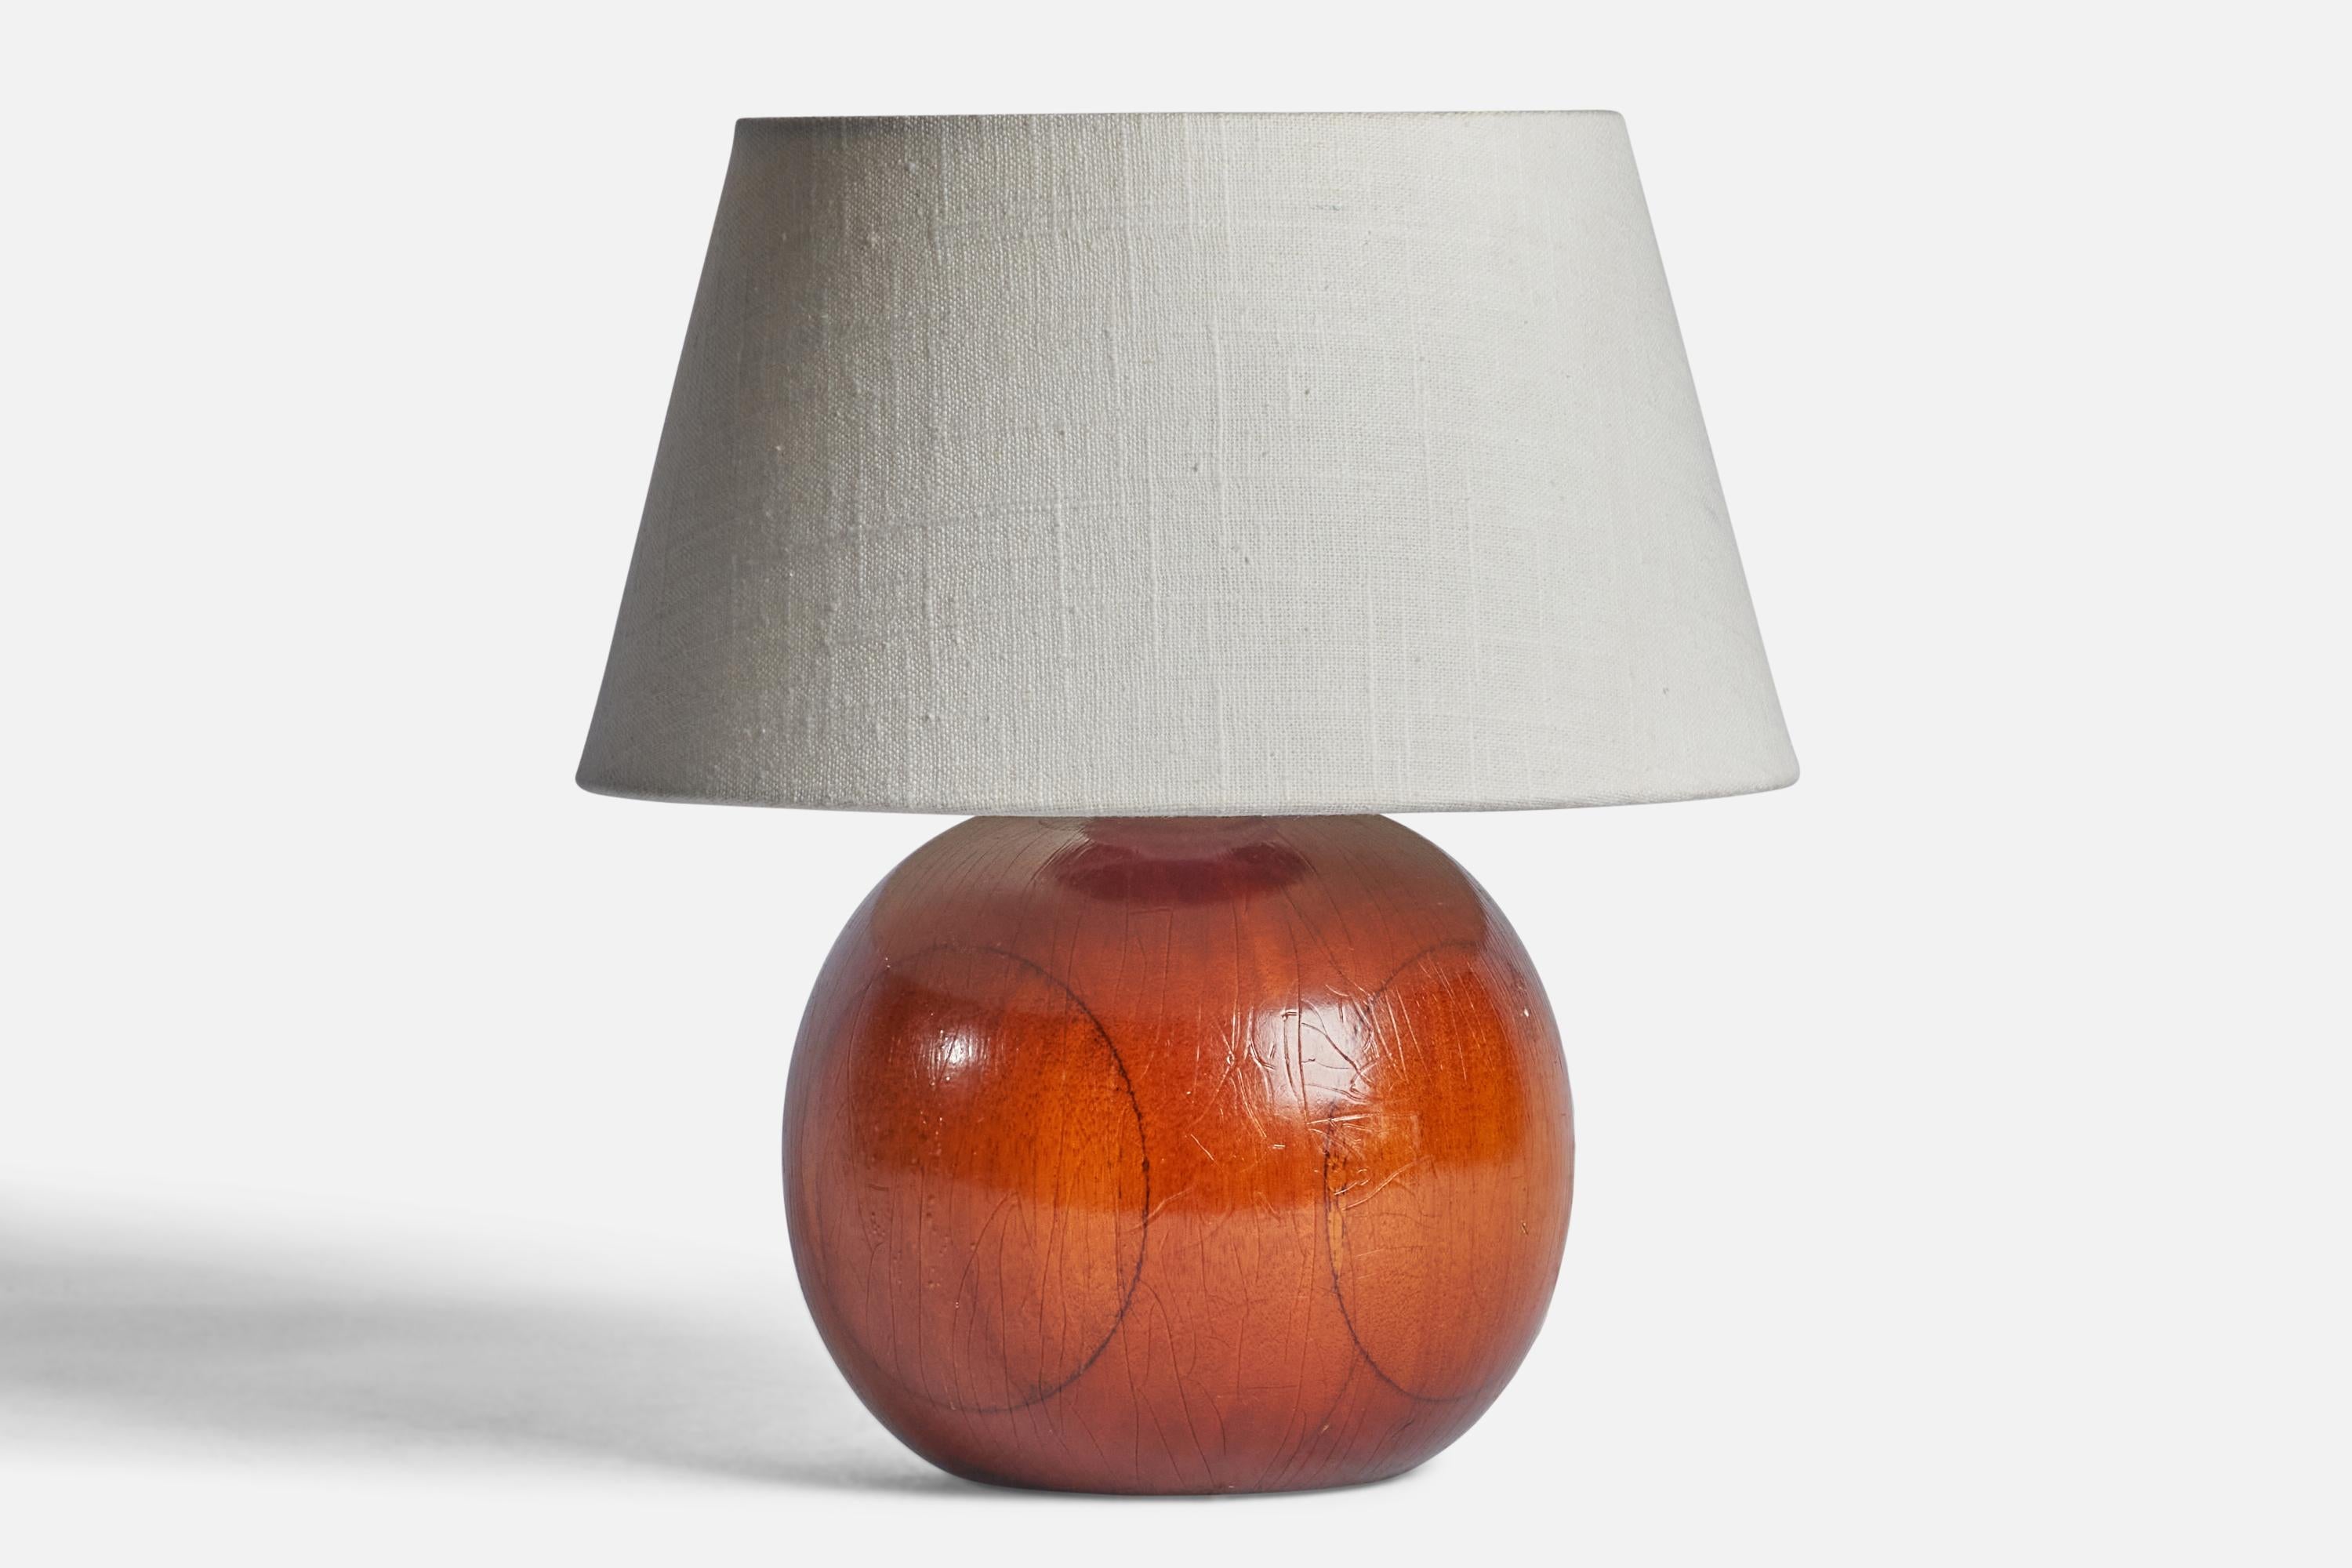 A wood table lamp designed and produced in Sweden, 1950s

Dimensions of Lamp (inches): 7.65 H x 6” Diameter
Dimensions of Shade (inches): 7” Top Diameter x 10” Bottom Diameter x 5.5” H 
Dimensions of Lamp with Shade (inches): 11” H x 10”